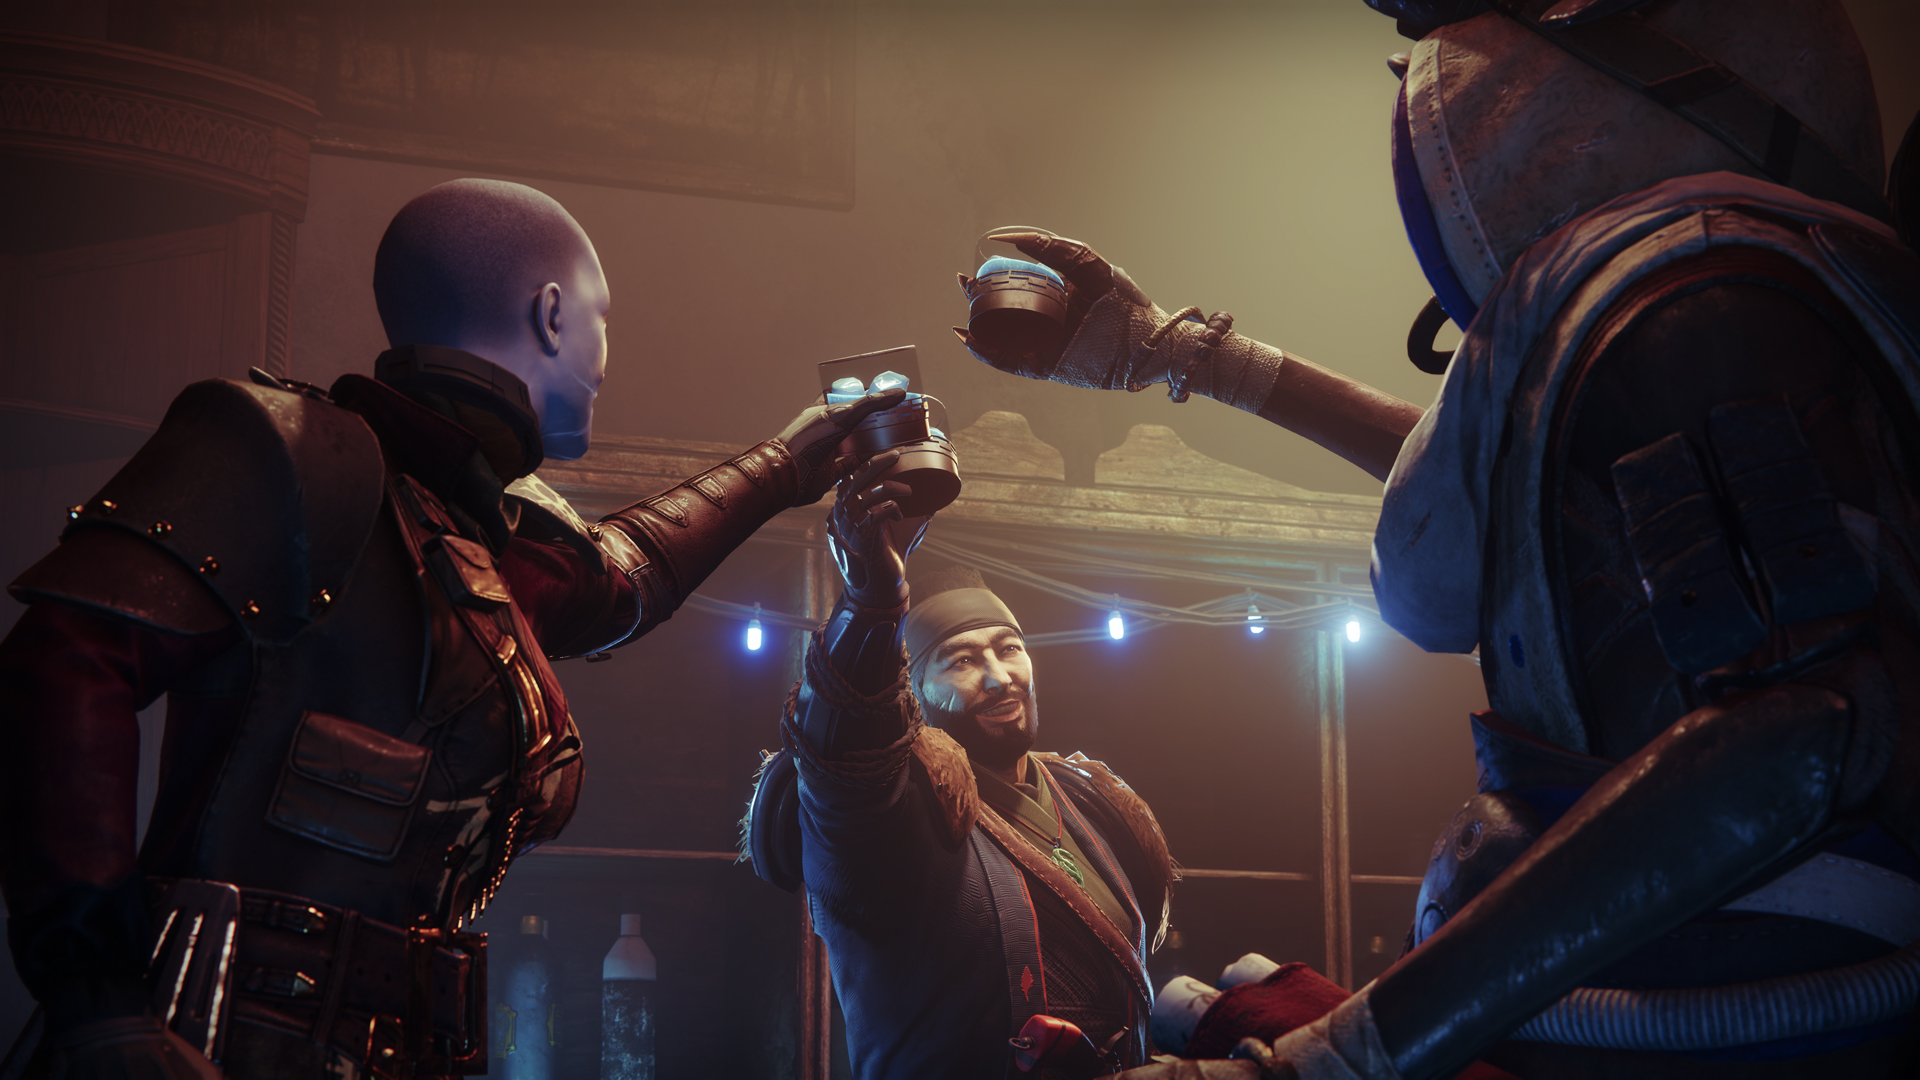 Destiny 2 Season of Plunder Drifter, Guardian, and Eido celebrating with drinks